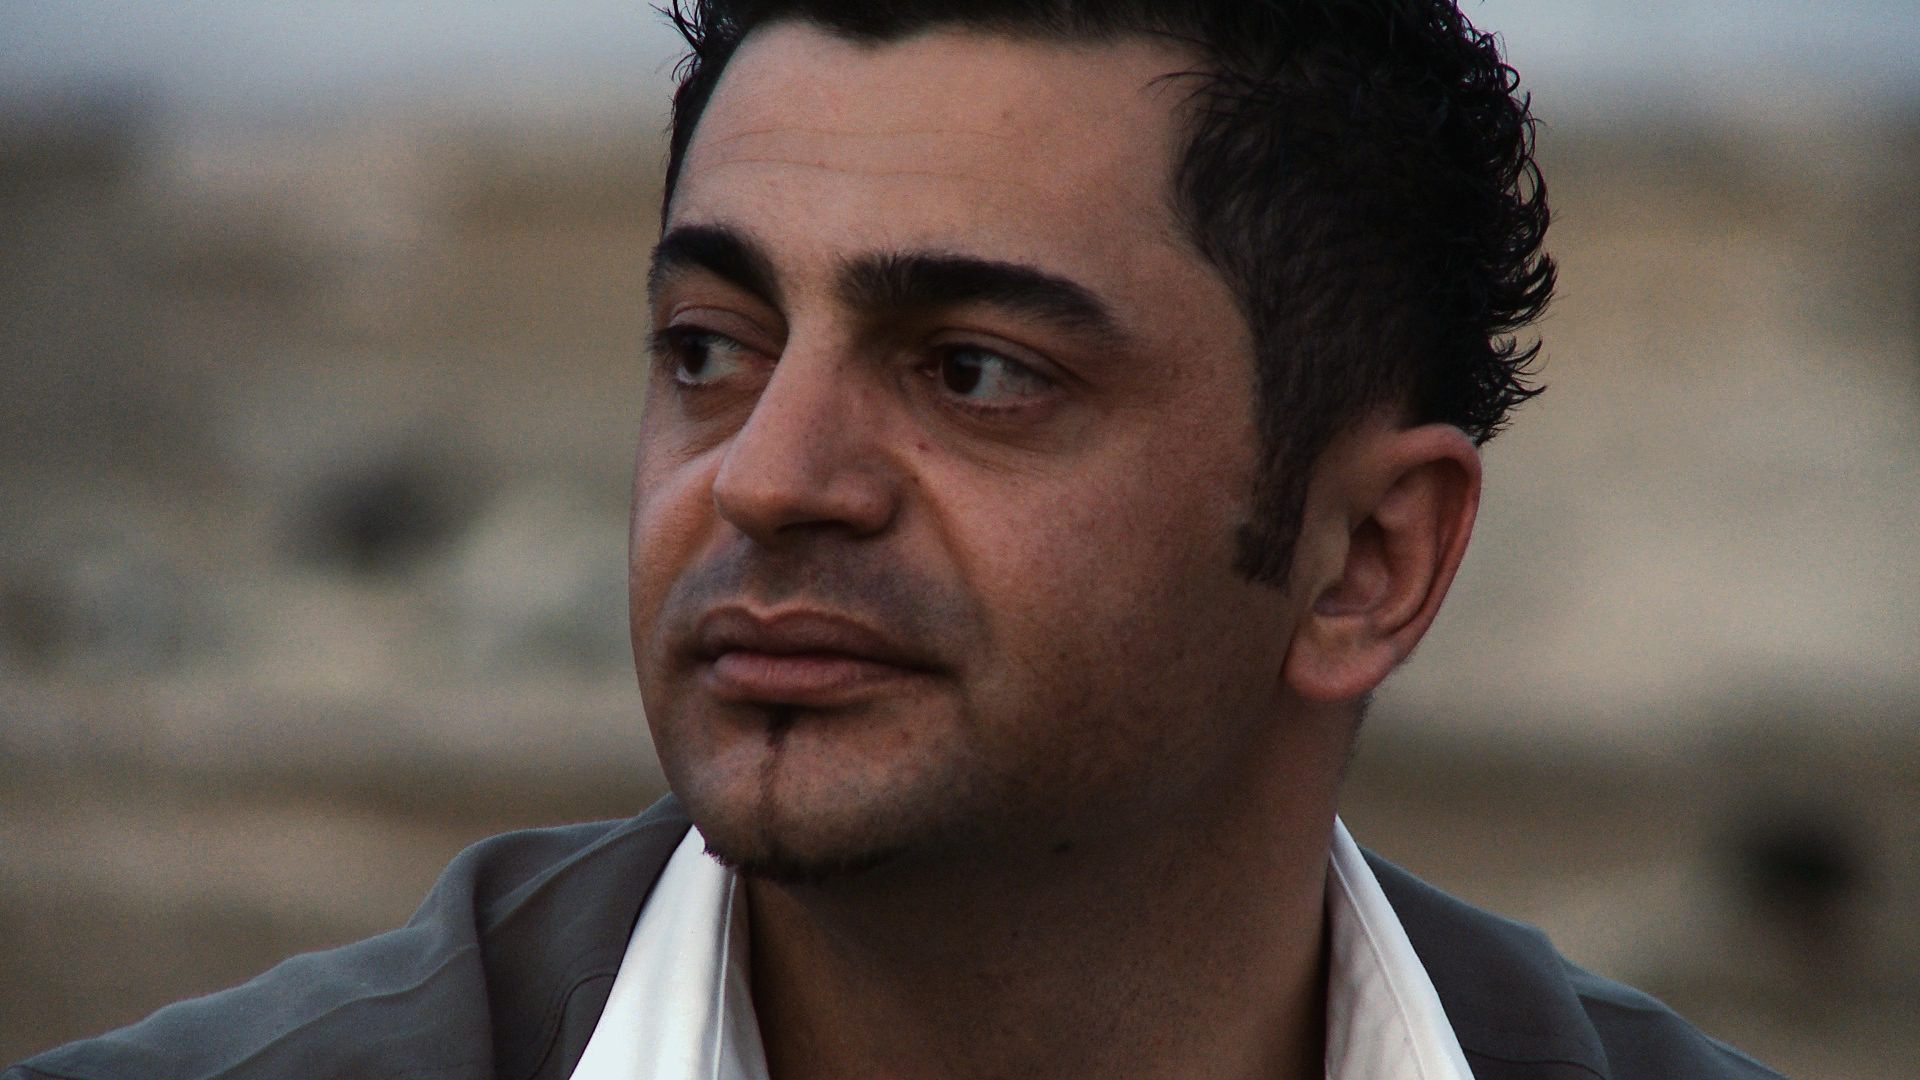 The story of TEIMOUR ABDULLAH MOHAMMED is one of the iconic stories of Anfal. He was the first person to provide an eyewitness account of the mass killing of Kurdish civilians by Iraqi death squads. His life was saved by an Arab bedouin family who risked the lives of their entire tribe to protect a little boy from Saddam Hussein’s secret police.